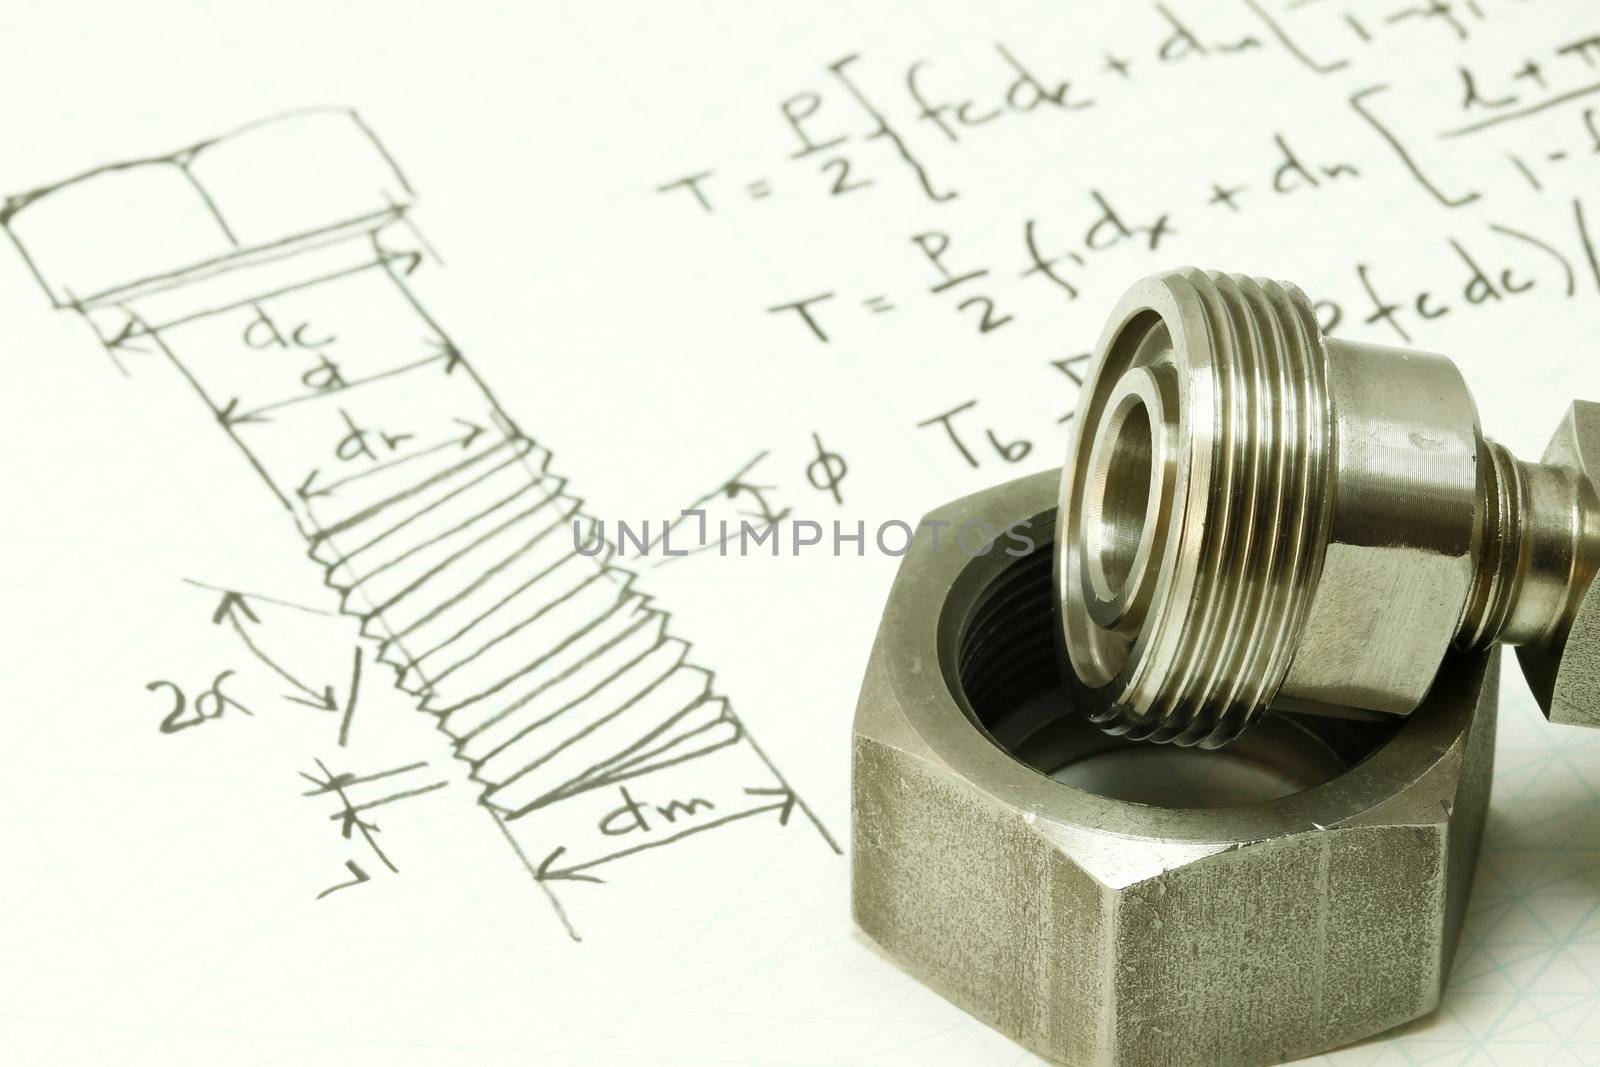 Machine design and calculation of bolt thread and nut.